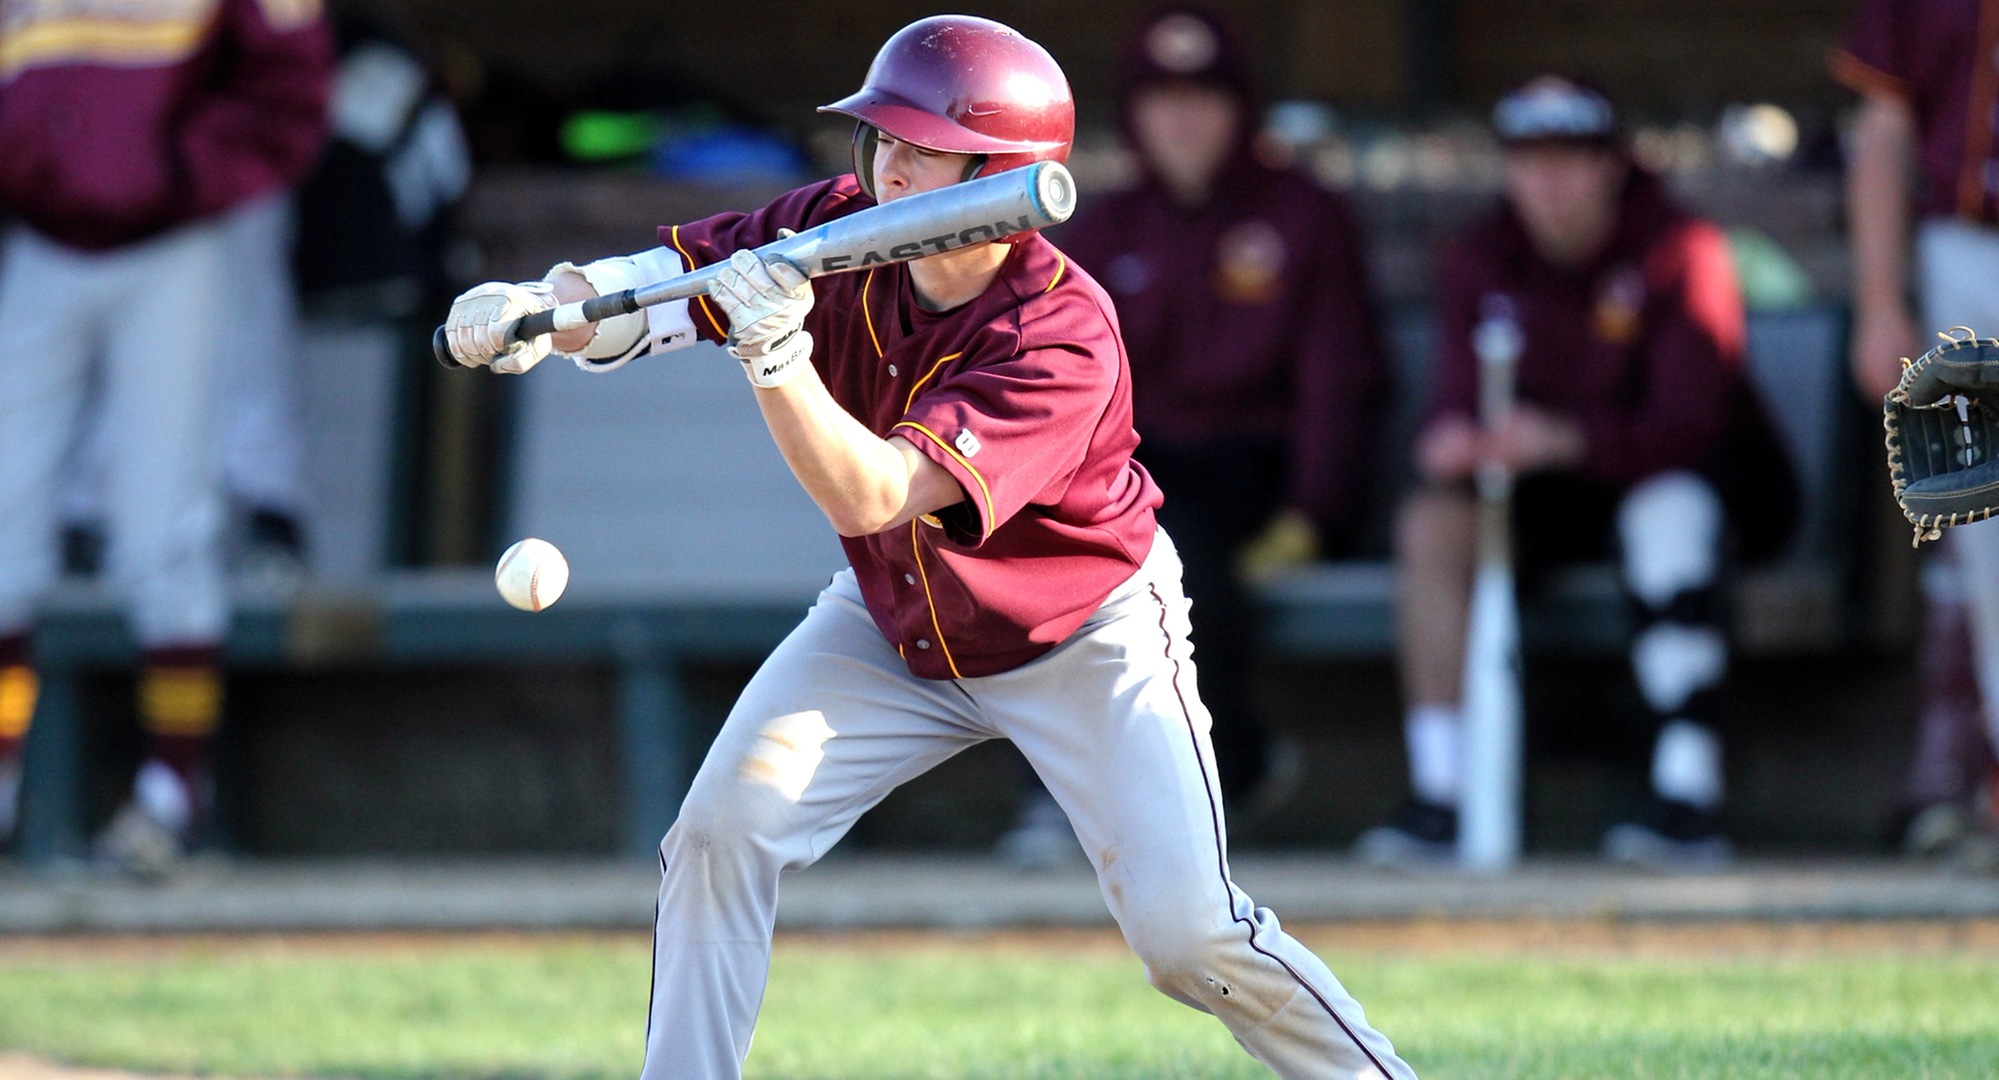 Sophomore Grant Toivonen lays down a bunt in the Cobbers' sweep at St. Olaf. Toivonen went 3-for-6 with two RBI and two runs scored on the day. (Photo courtesy of Rose Marie Peterson - St. Olaf Sports Info Dept.)